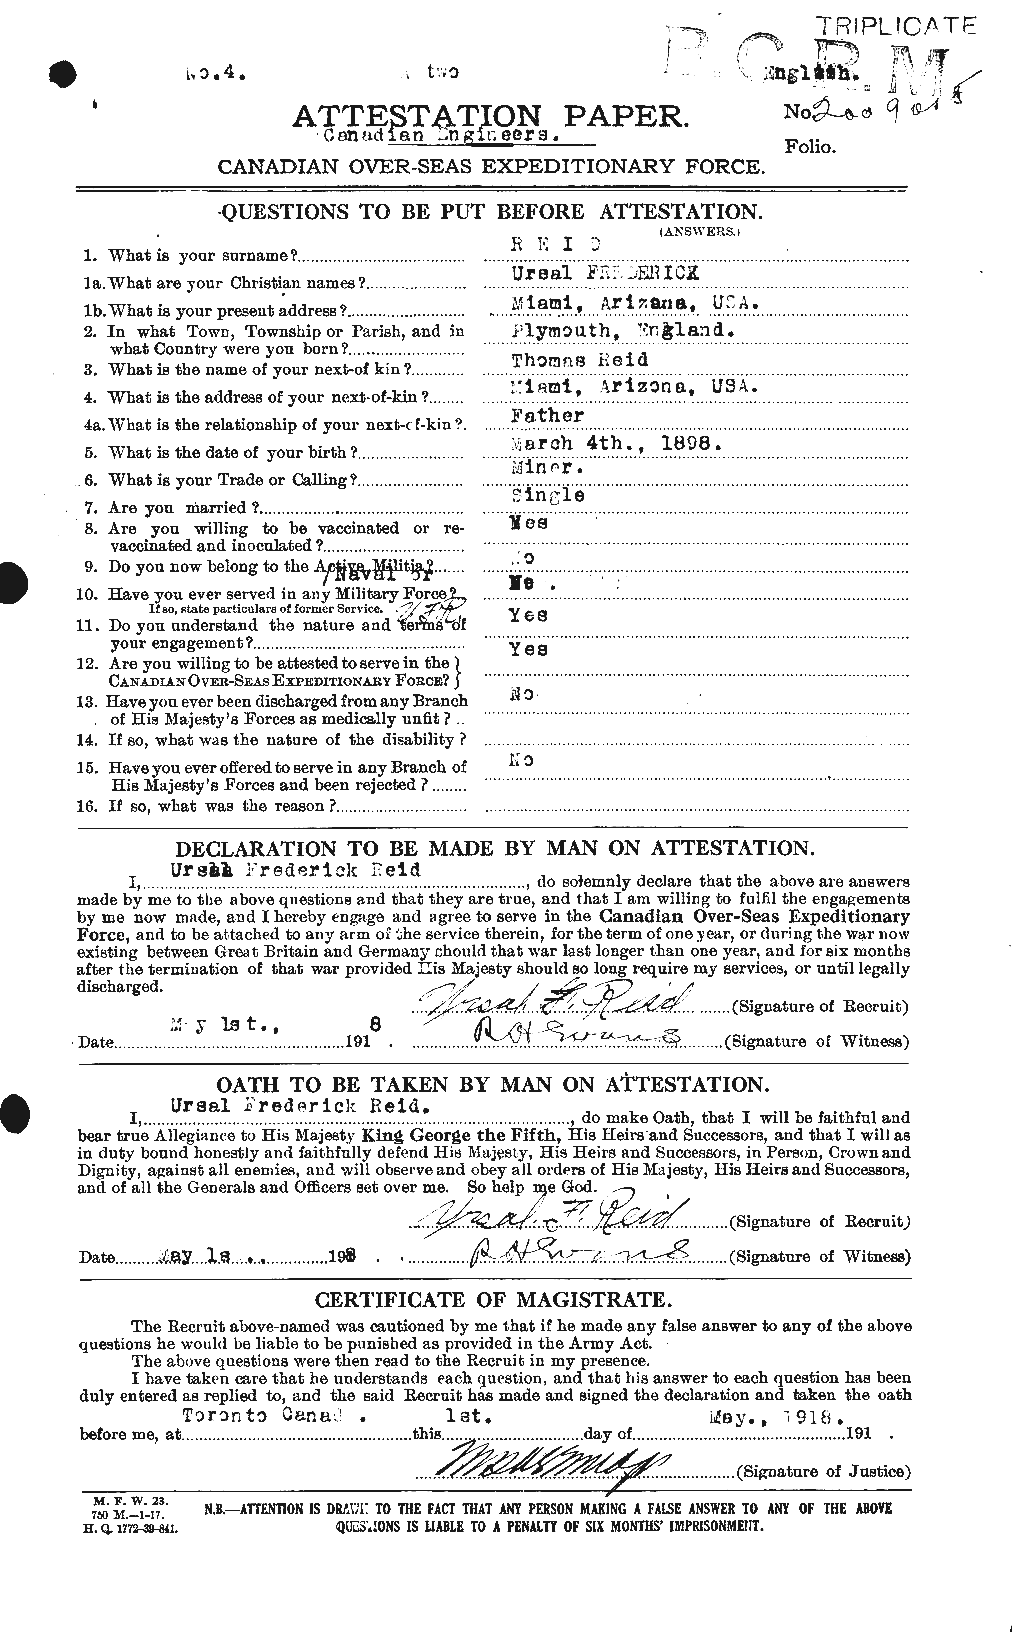 Personnel Records of the First World War - CEF 602010a